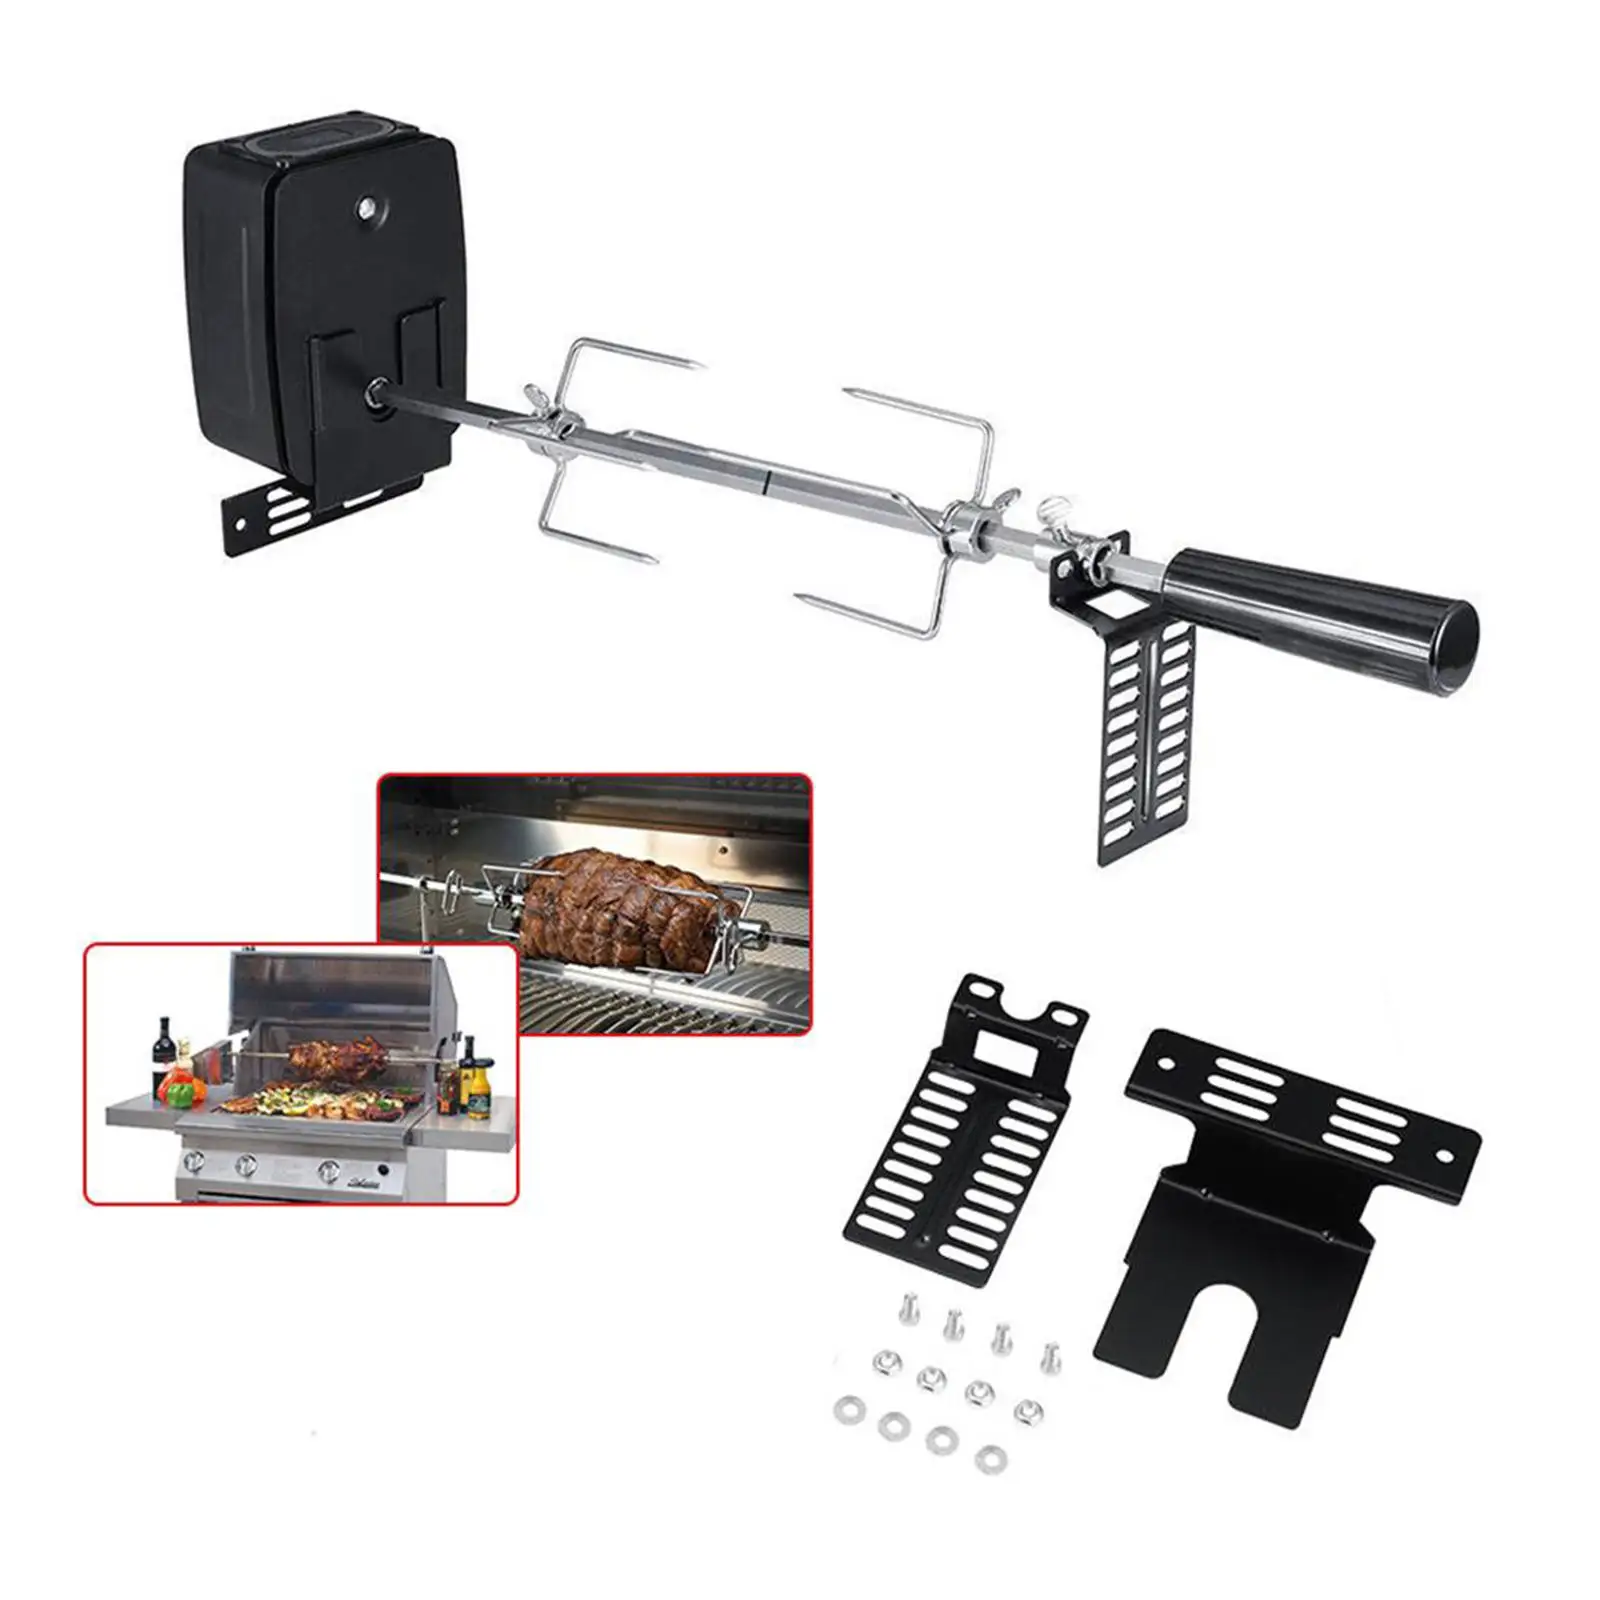 2Pcs Electric Grill Motor Bracket Accessory Support Easy to Install with Screws Rotisserie Rod Rack for Patio Outdoor Camping